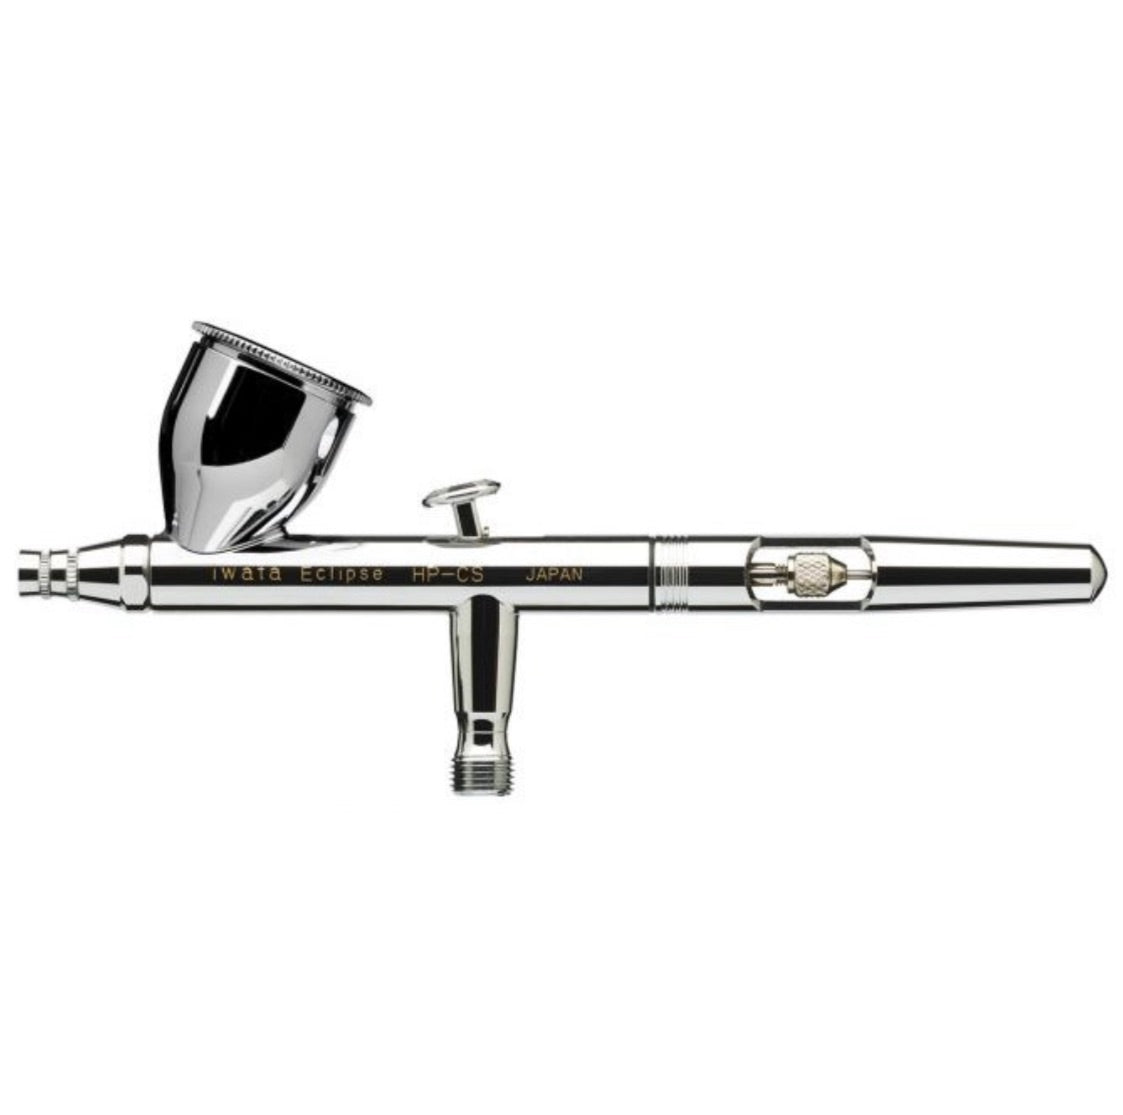 I6191 Single Cut Handle for Eclipse Iwata Part # I6191 — Midwest Airbrush  Supply Co